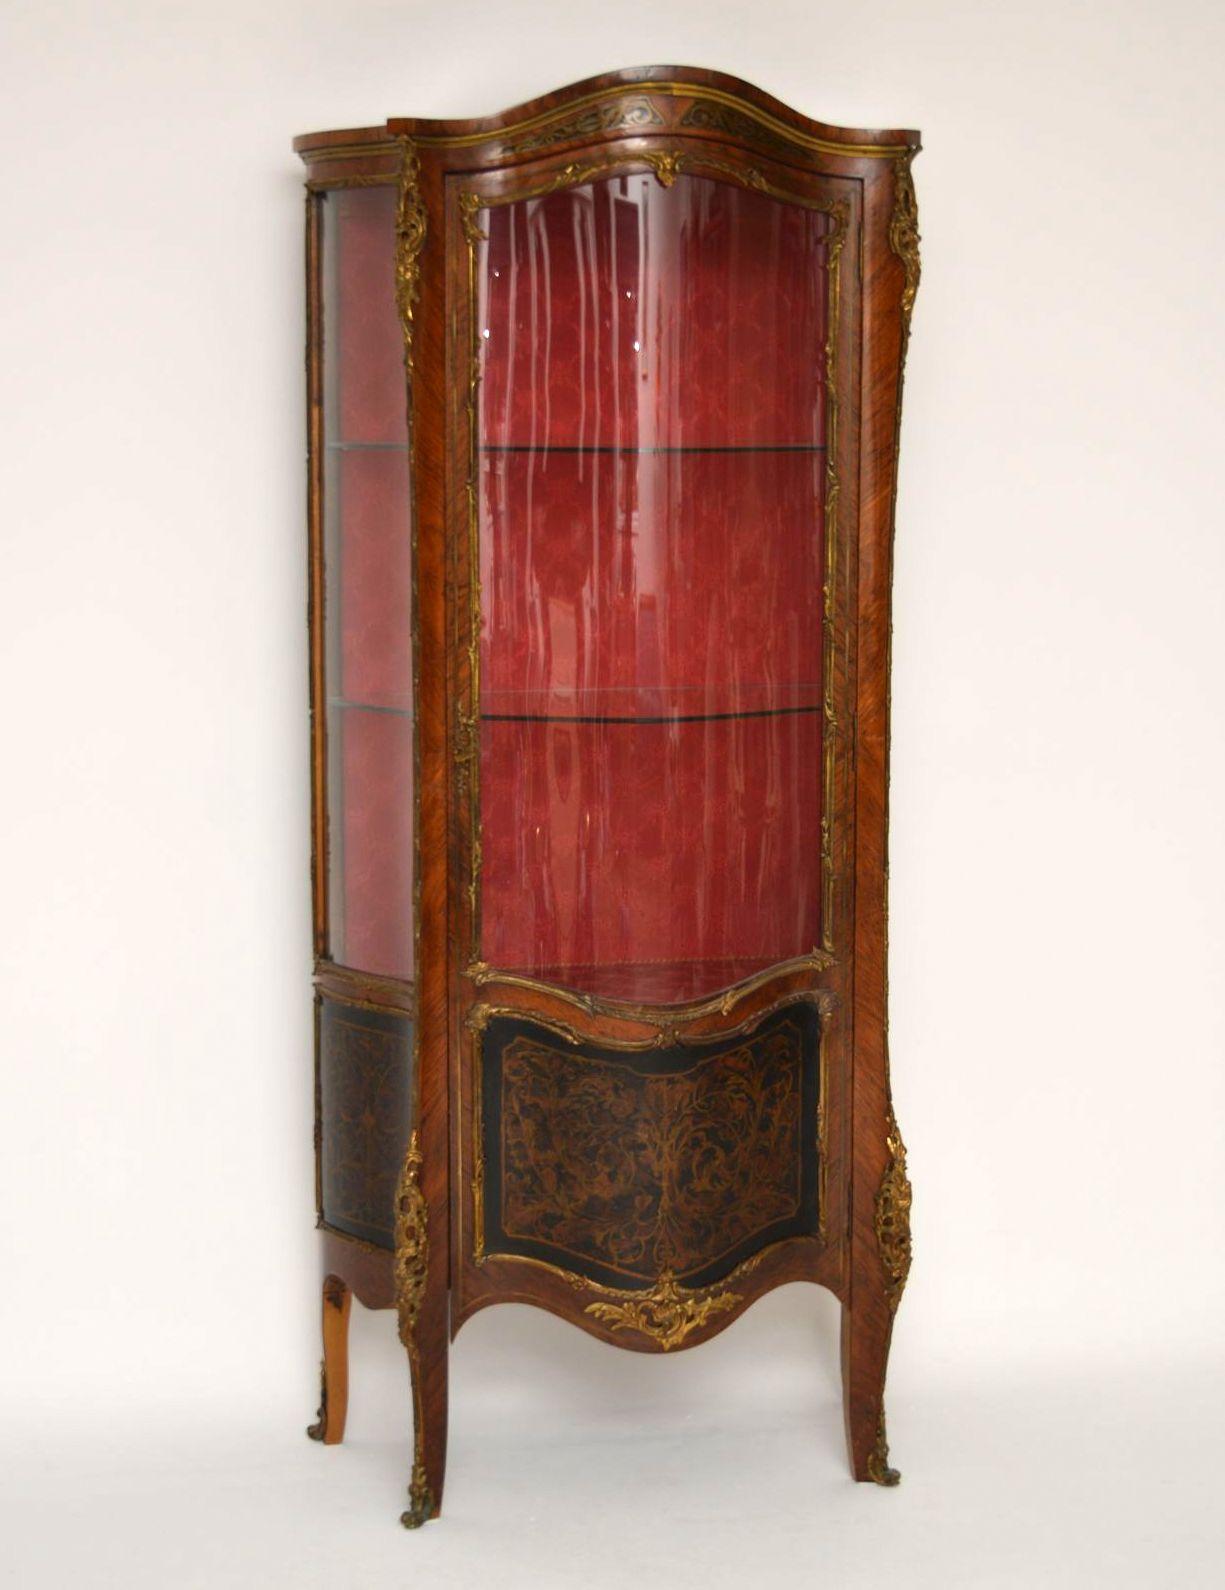 Antique French display cabinet in either Kingwood or Rosewood, with brass inlays and faux boulle bottom panels. It's has a serpentine shaped front and the shaped glass on the front door and sides are original. This display cabinet is in lovely